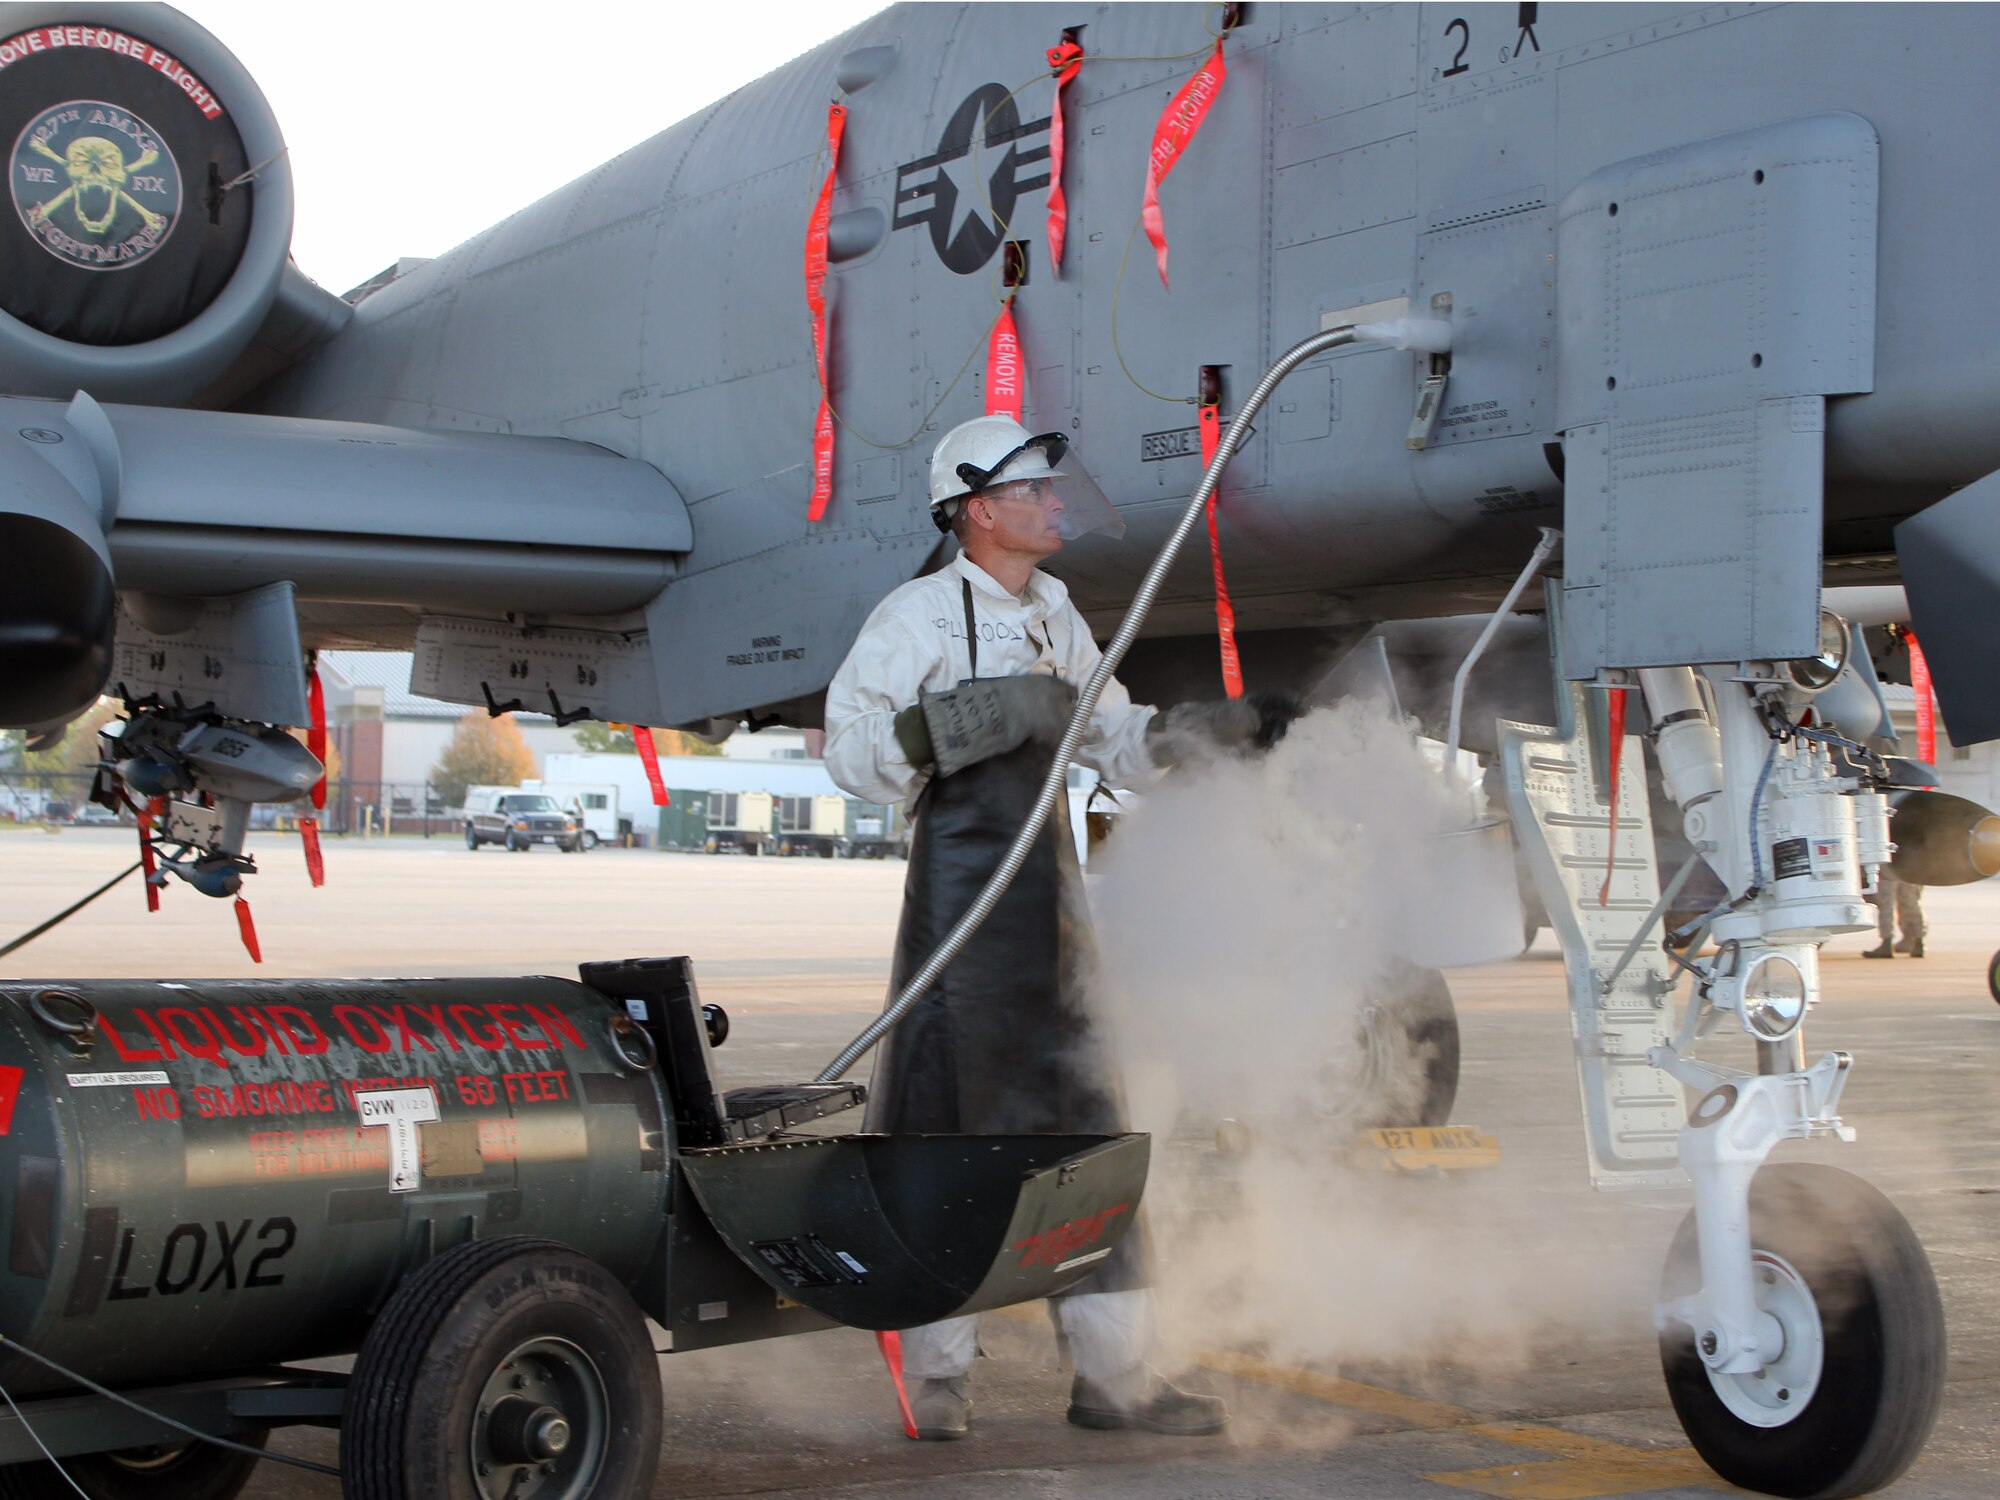 130829-Z-VA676-069 -- Staff Sgt. Scott Dykstra, a crew chief with the 127th Wing, services an A-10 Thunderbolt II with liquid oxygen, or LOX, during routine operations at Selfridge Air National Guard Base, Mich., Aug. 29, 2013. Though the use of LOX is now routine at Selfridge and across the Air Force, it wasn’t until a formation of early “pursuit” planes took off from Selfridge in 1931 that LOX came into general use for military aircraft. (U.S. Air National Guard photo by TSgt. Dan Heaton/Released) 